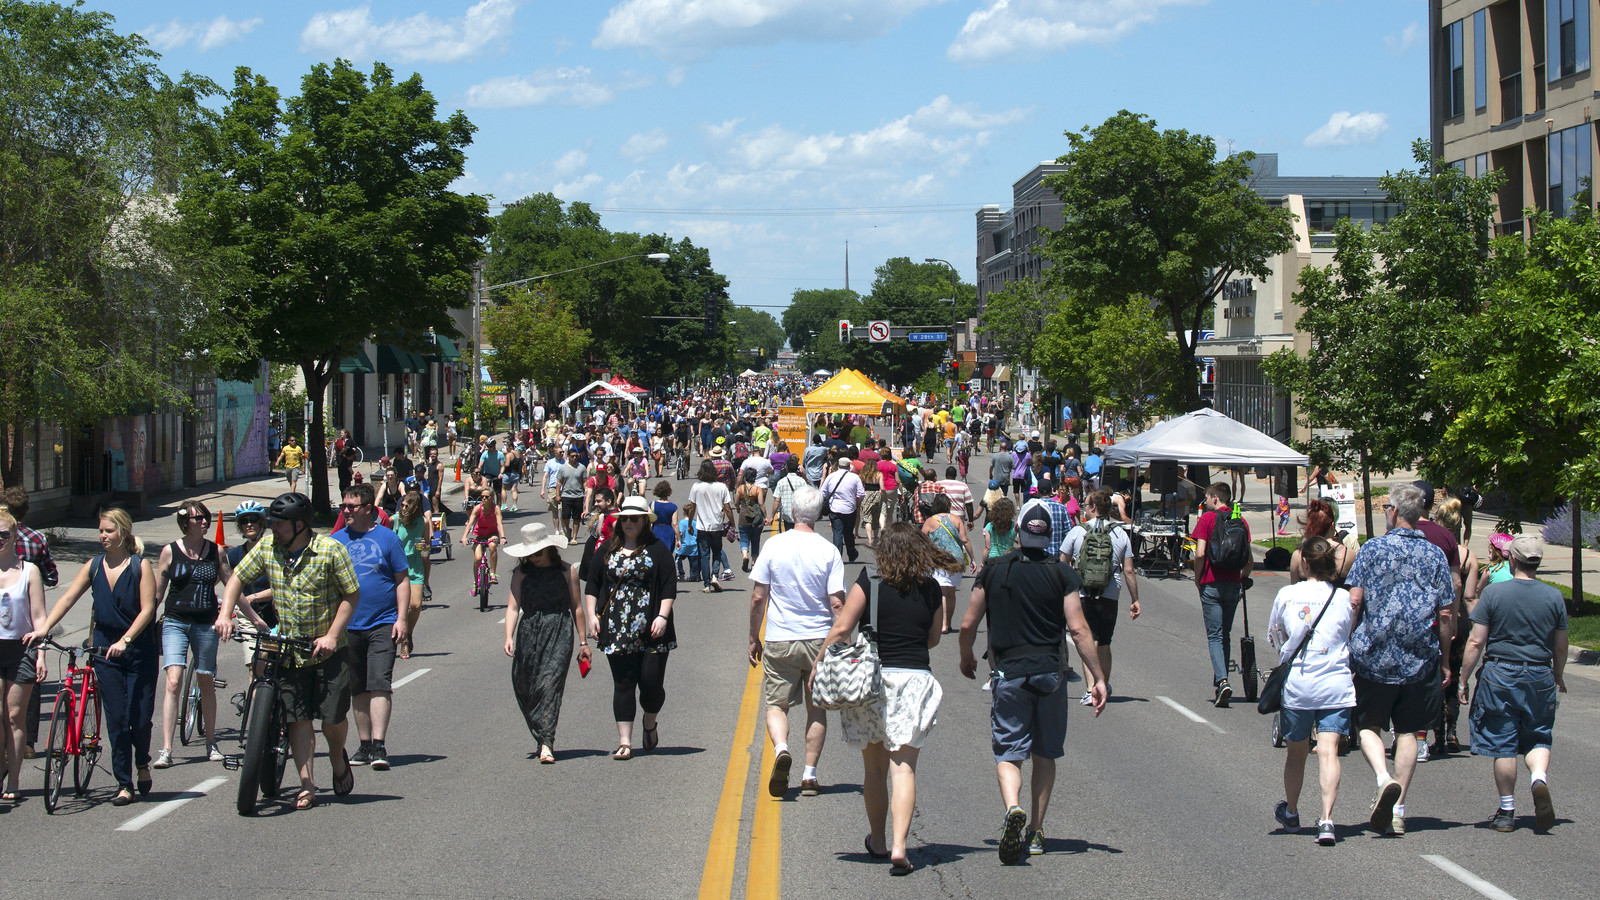 Hundreds of people walking and biking on a street in Minnesota.